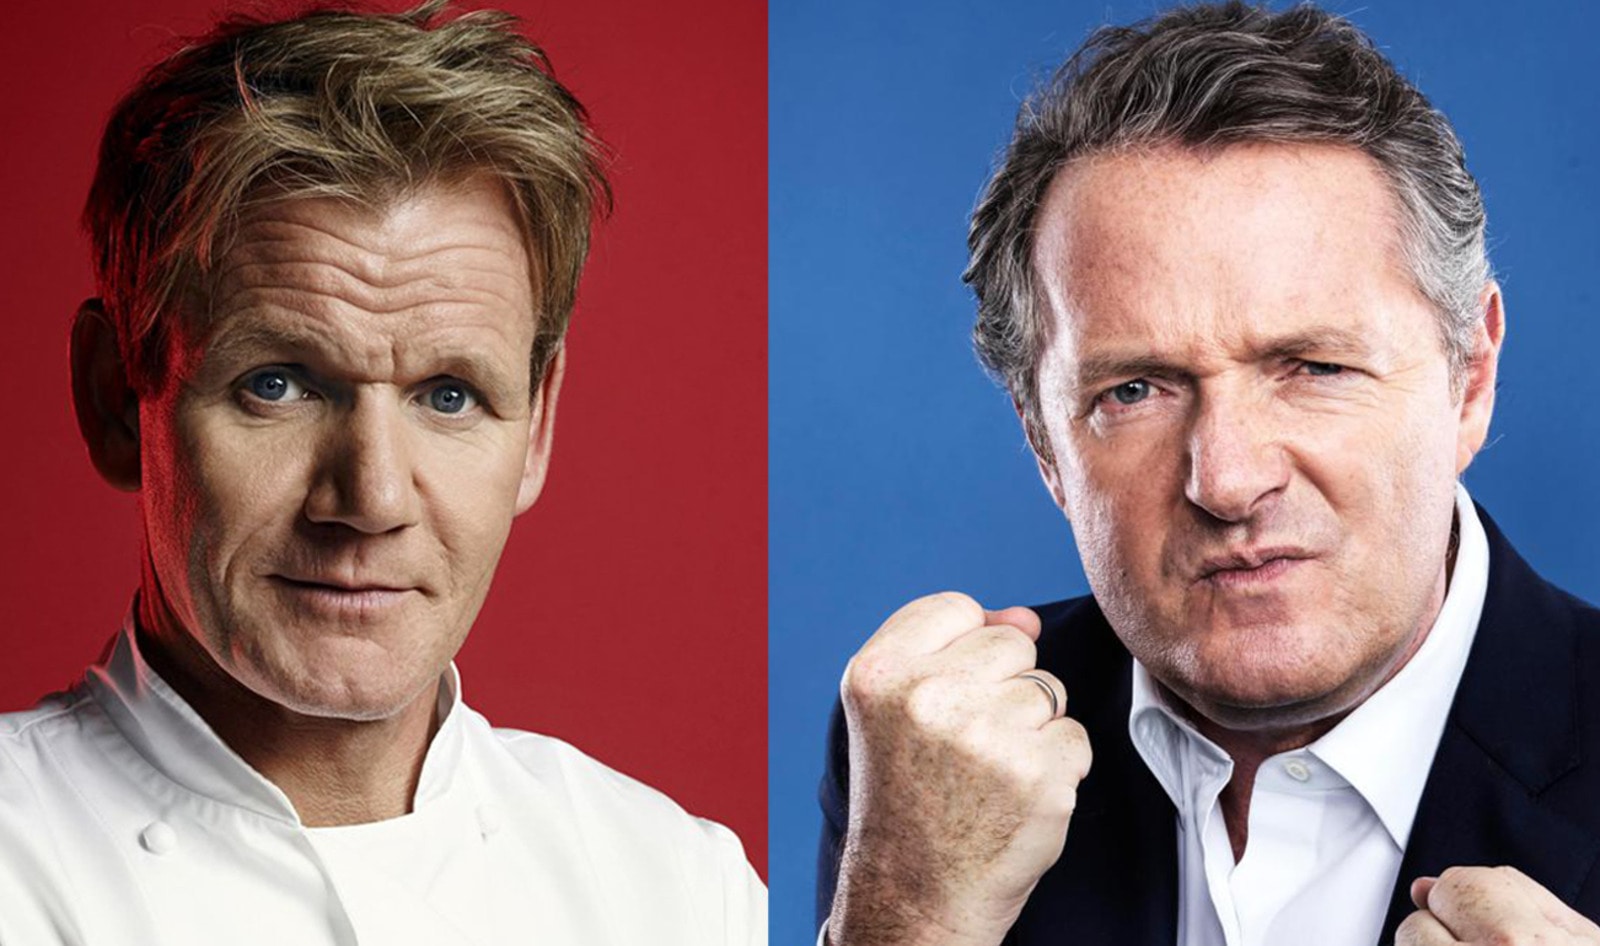 Gordon Ramsay to Piers Morgan: Go F*ck Yourself and Stop Hating Vegans